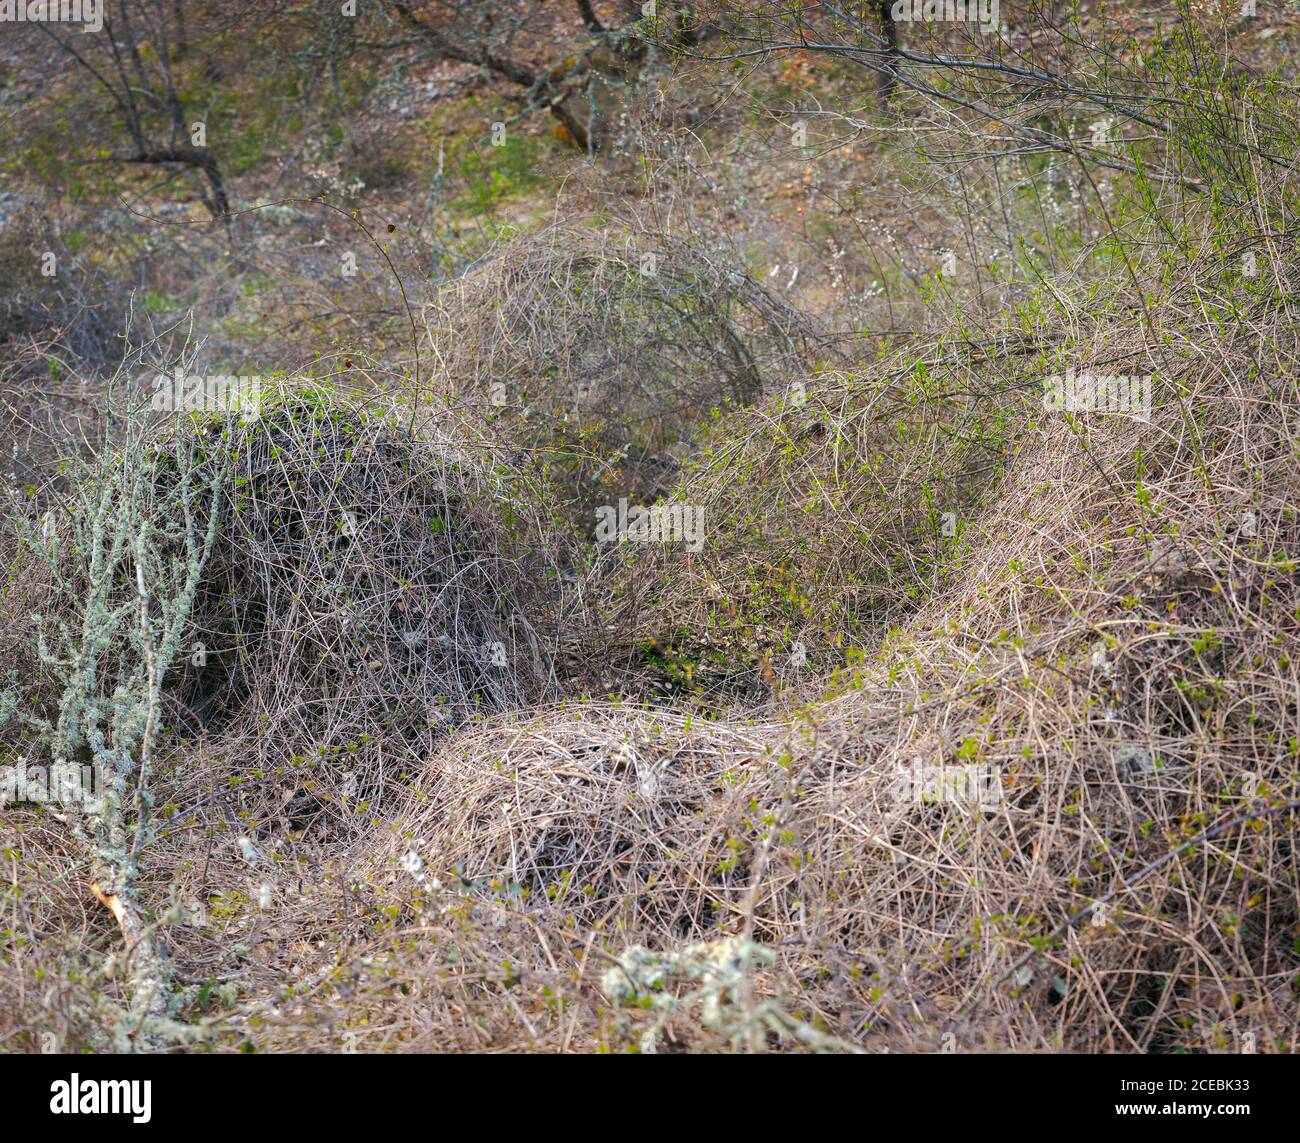 Dry grass and bushes growing in forest with leafless trees Stock Photo